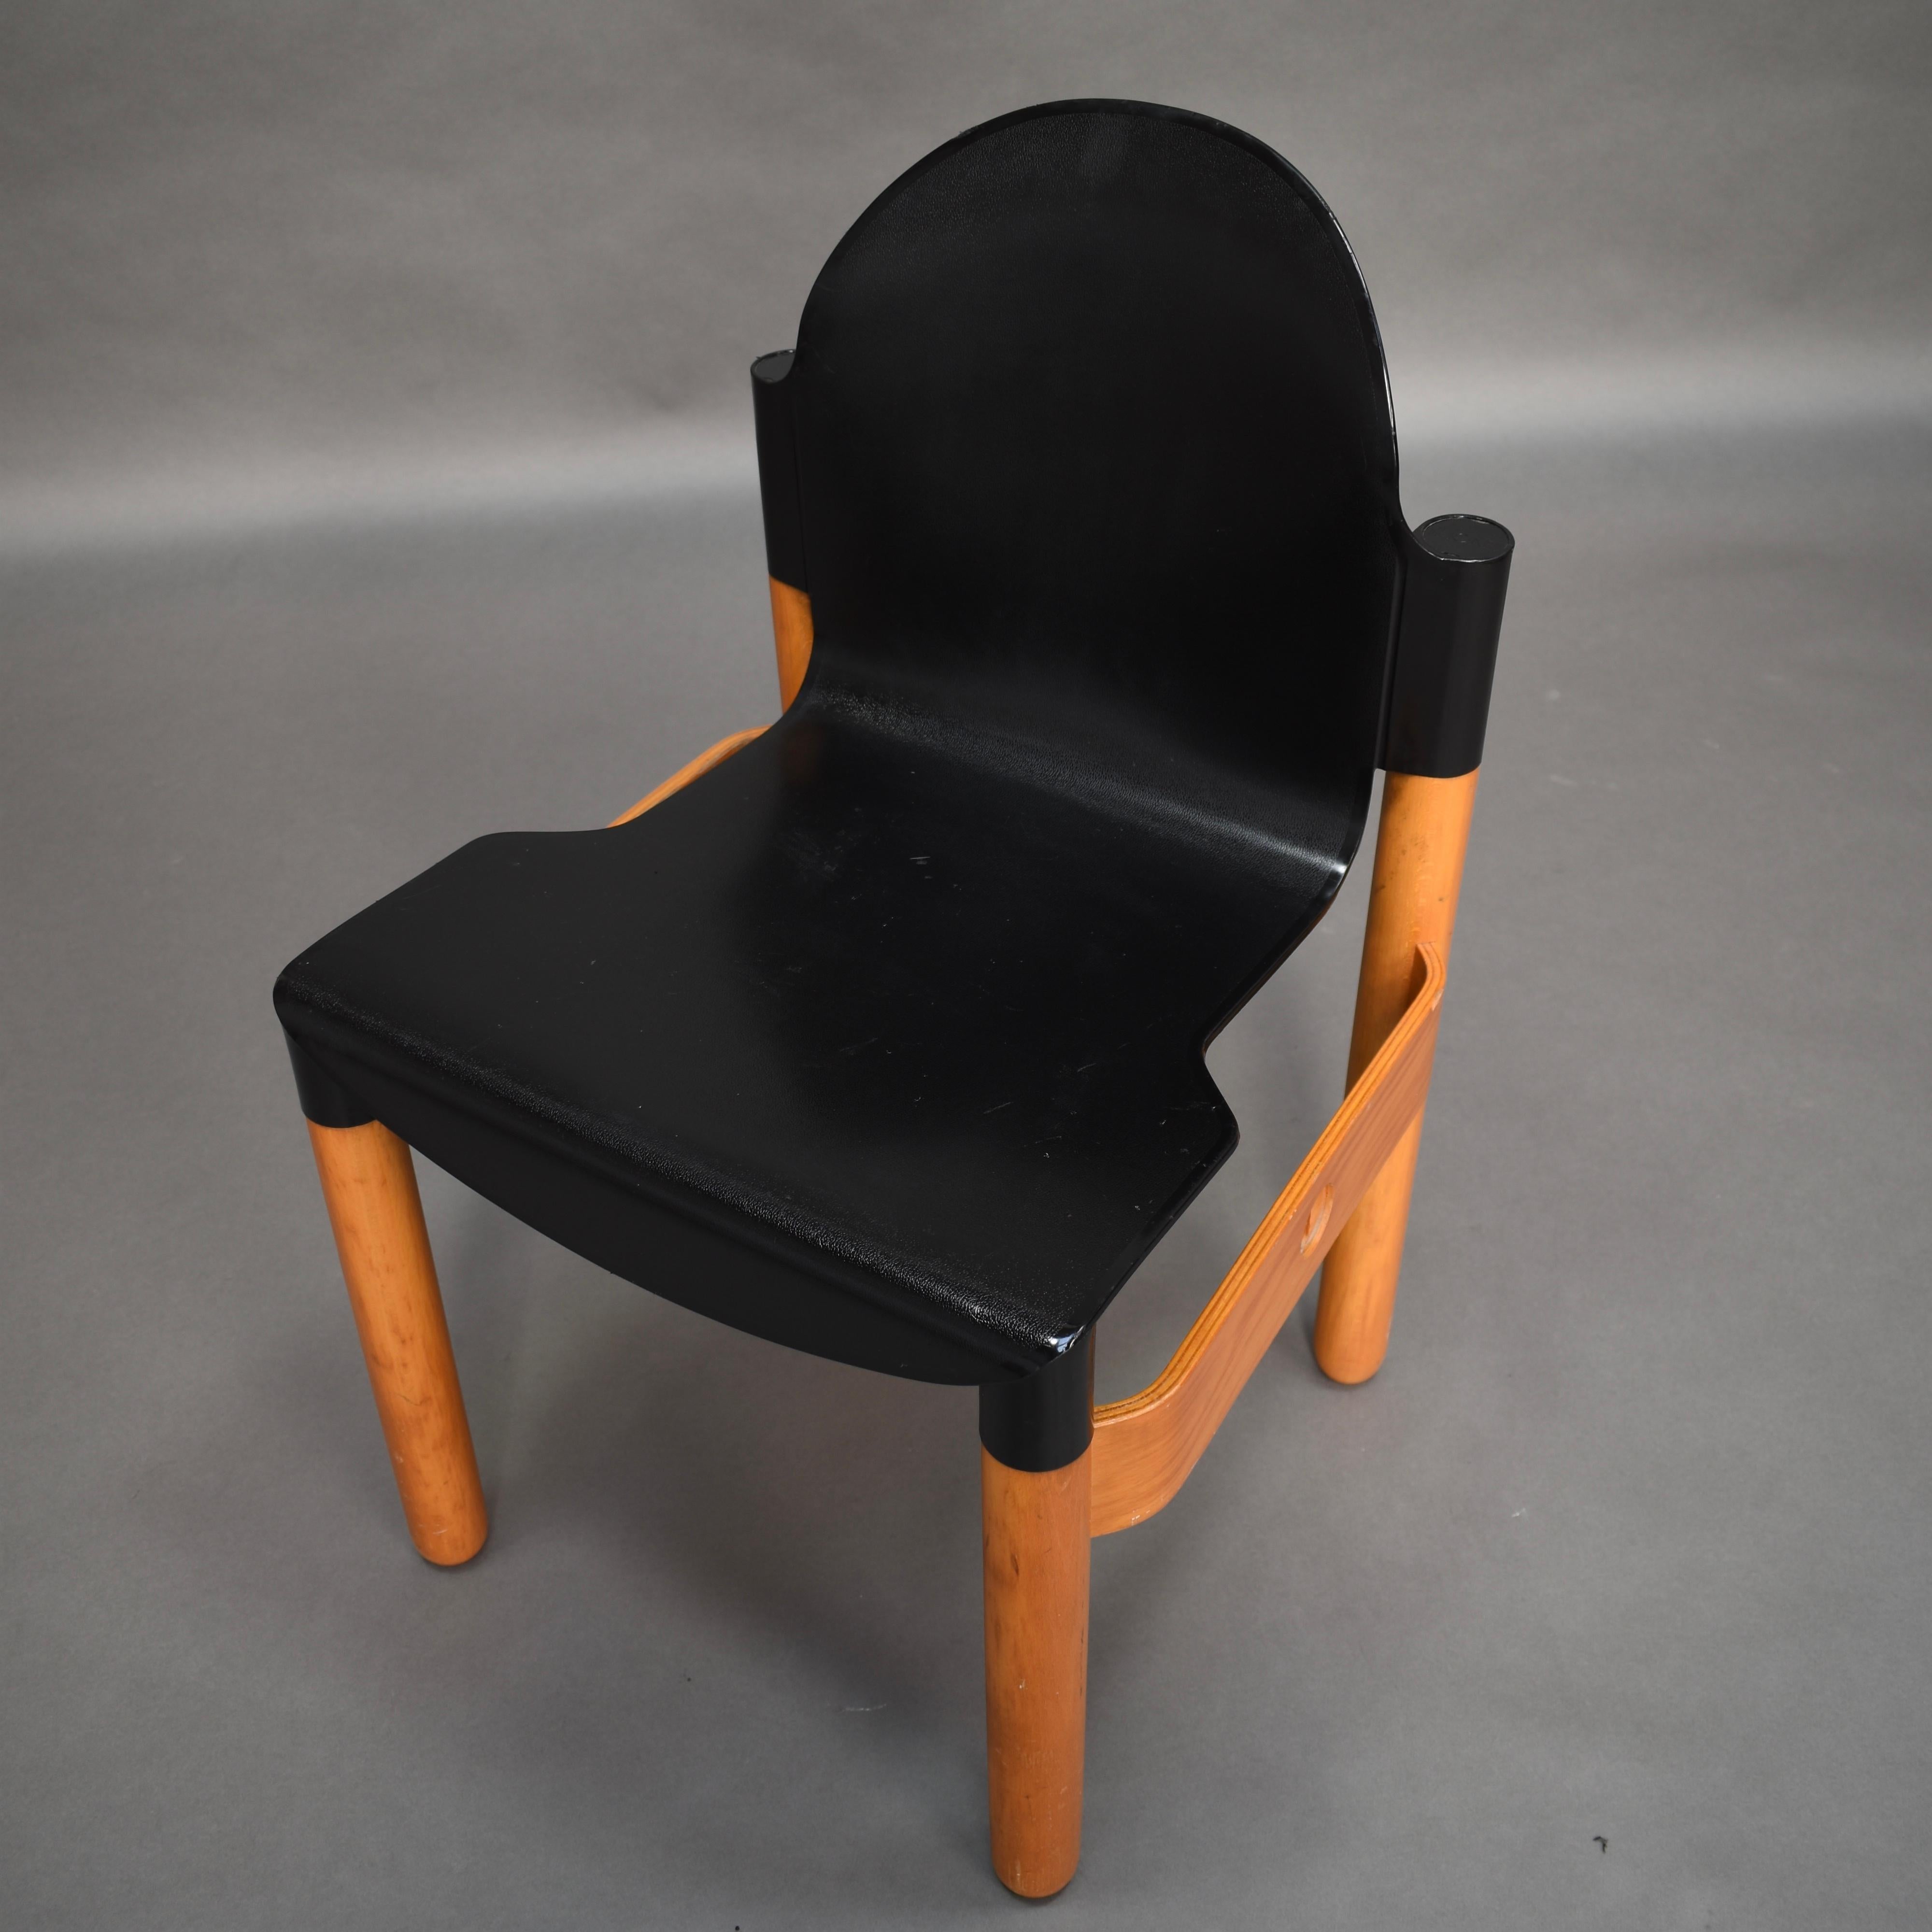 Thonet Chair in Birch and Plastic by Gerd Lange, West-Germany, 1973 For Sale 1